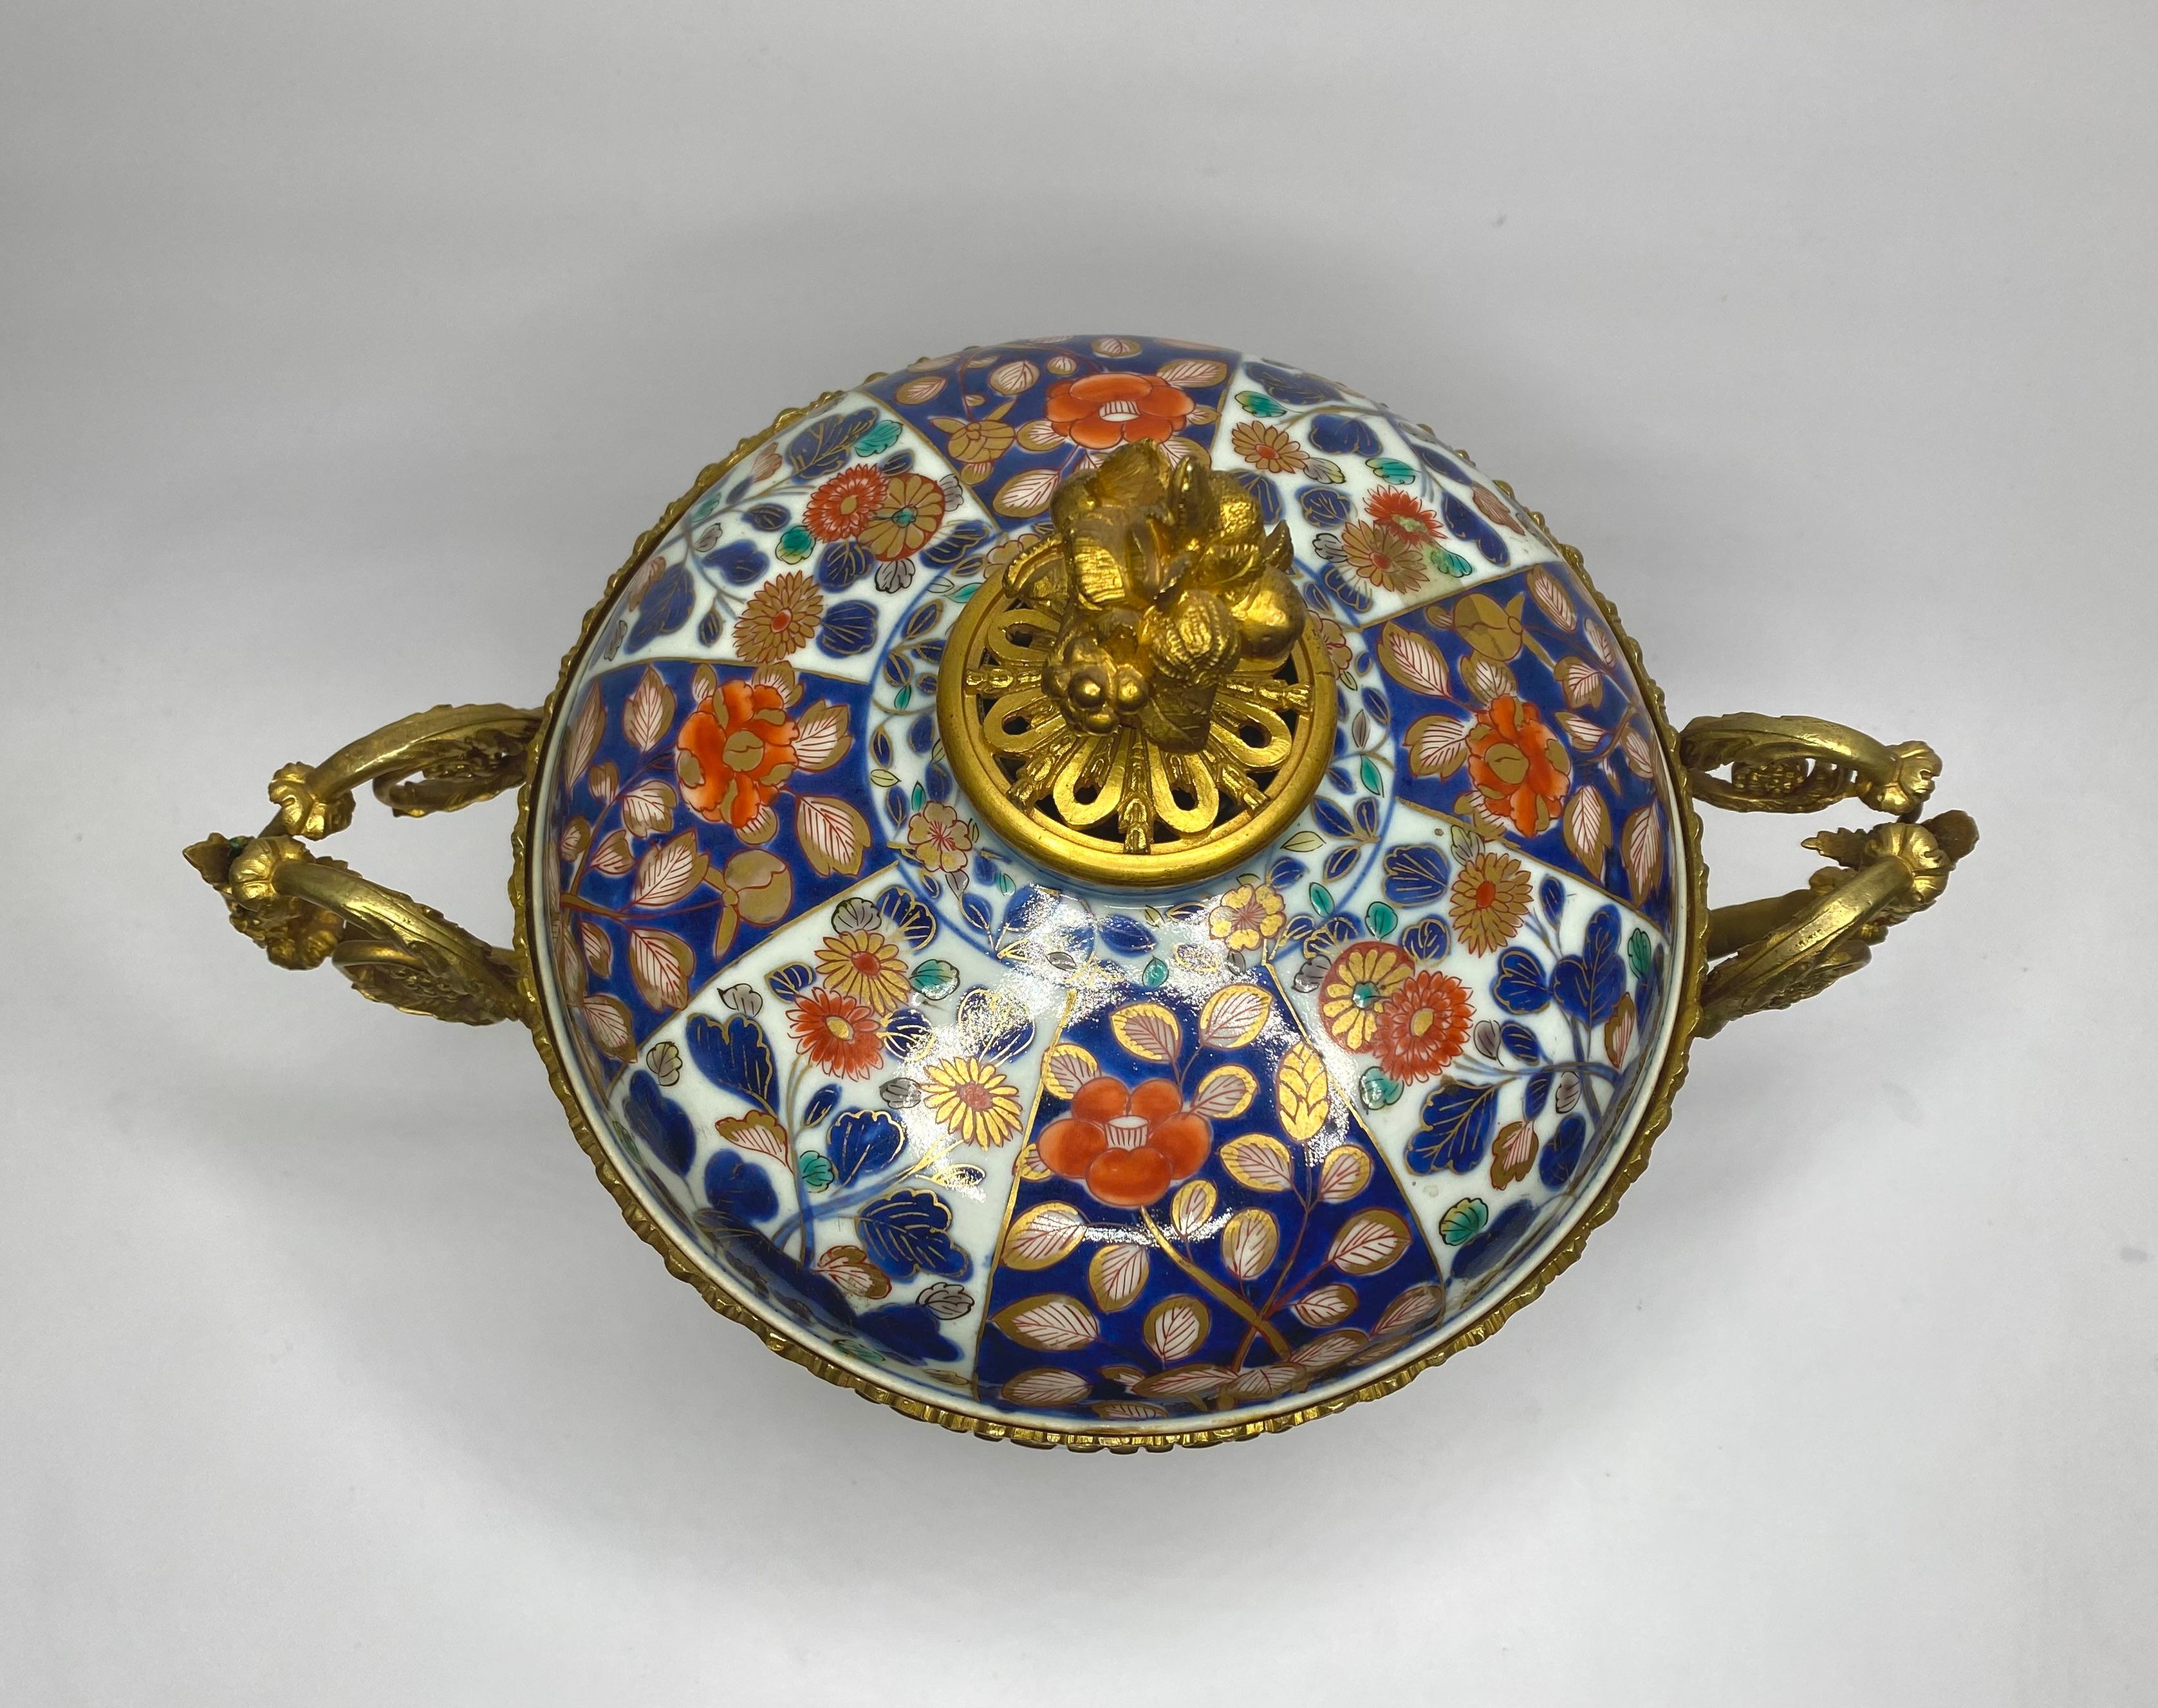 A large Japanese Imari bowl and cover, c. 1700, Arita, Edo Period, with 19th Century French ormolu mounts. The deep sided bowl, hand painted with alternating panels of flowering plants, in typical Imari enamels, heightened in gilt. The footrim with